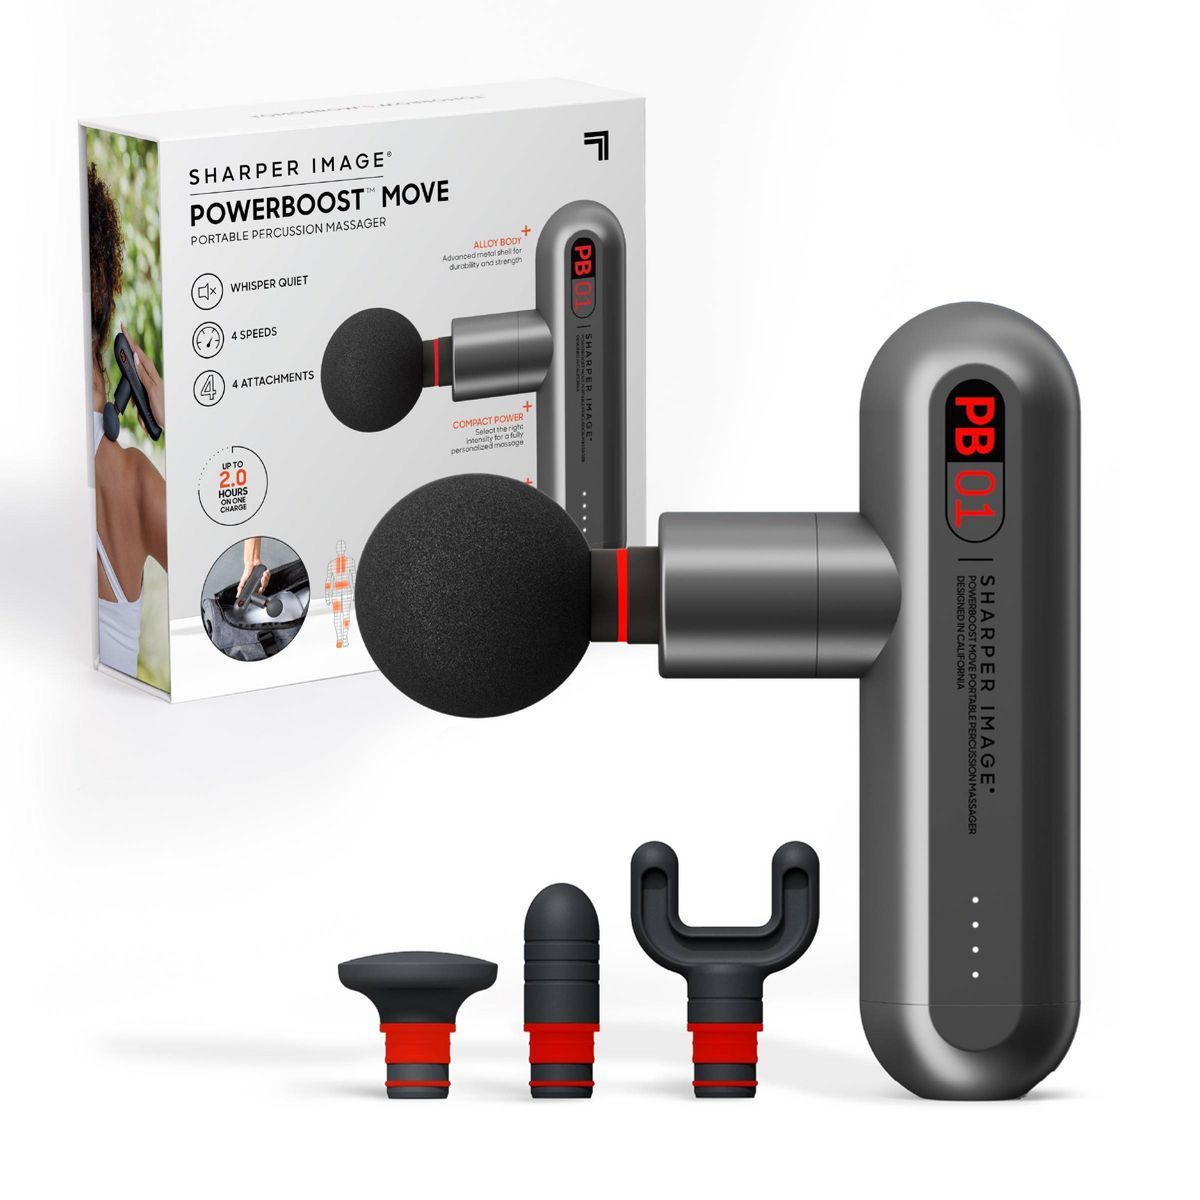 Sharper Image Powerboost Move Deep Tissue Travel Percussion Massager | Target